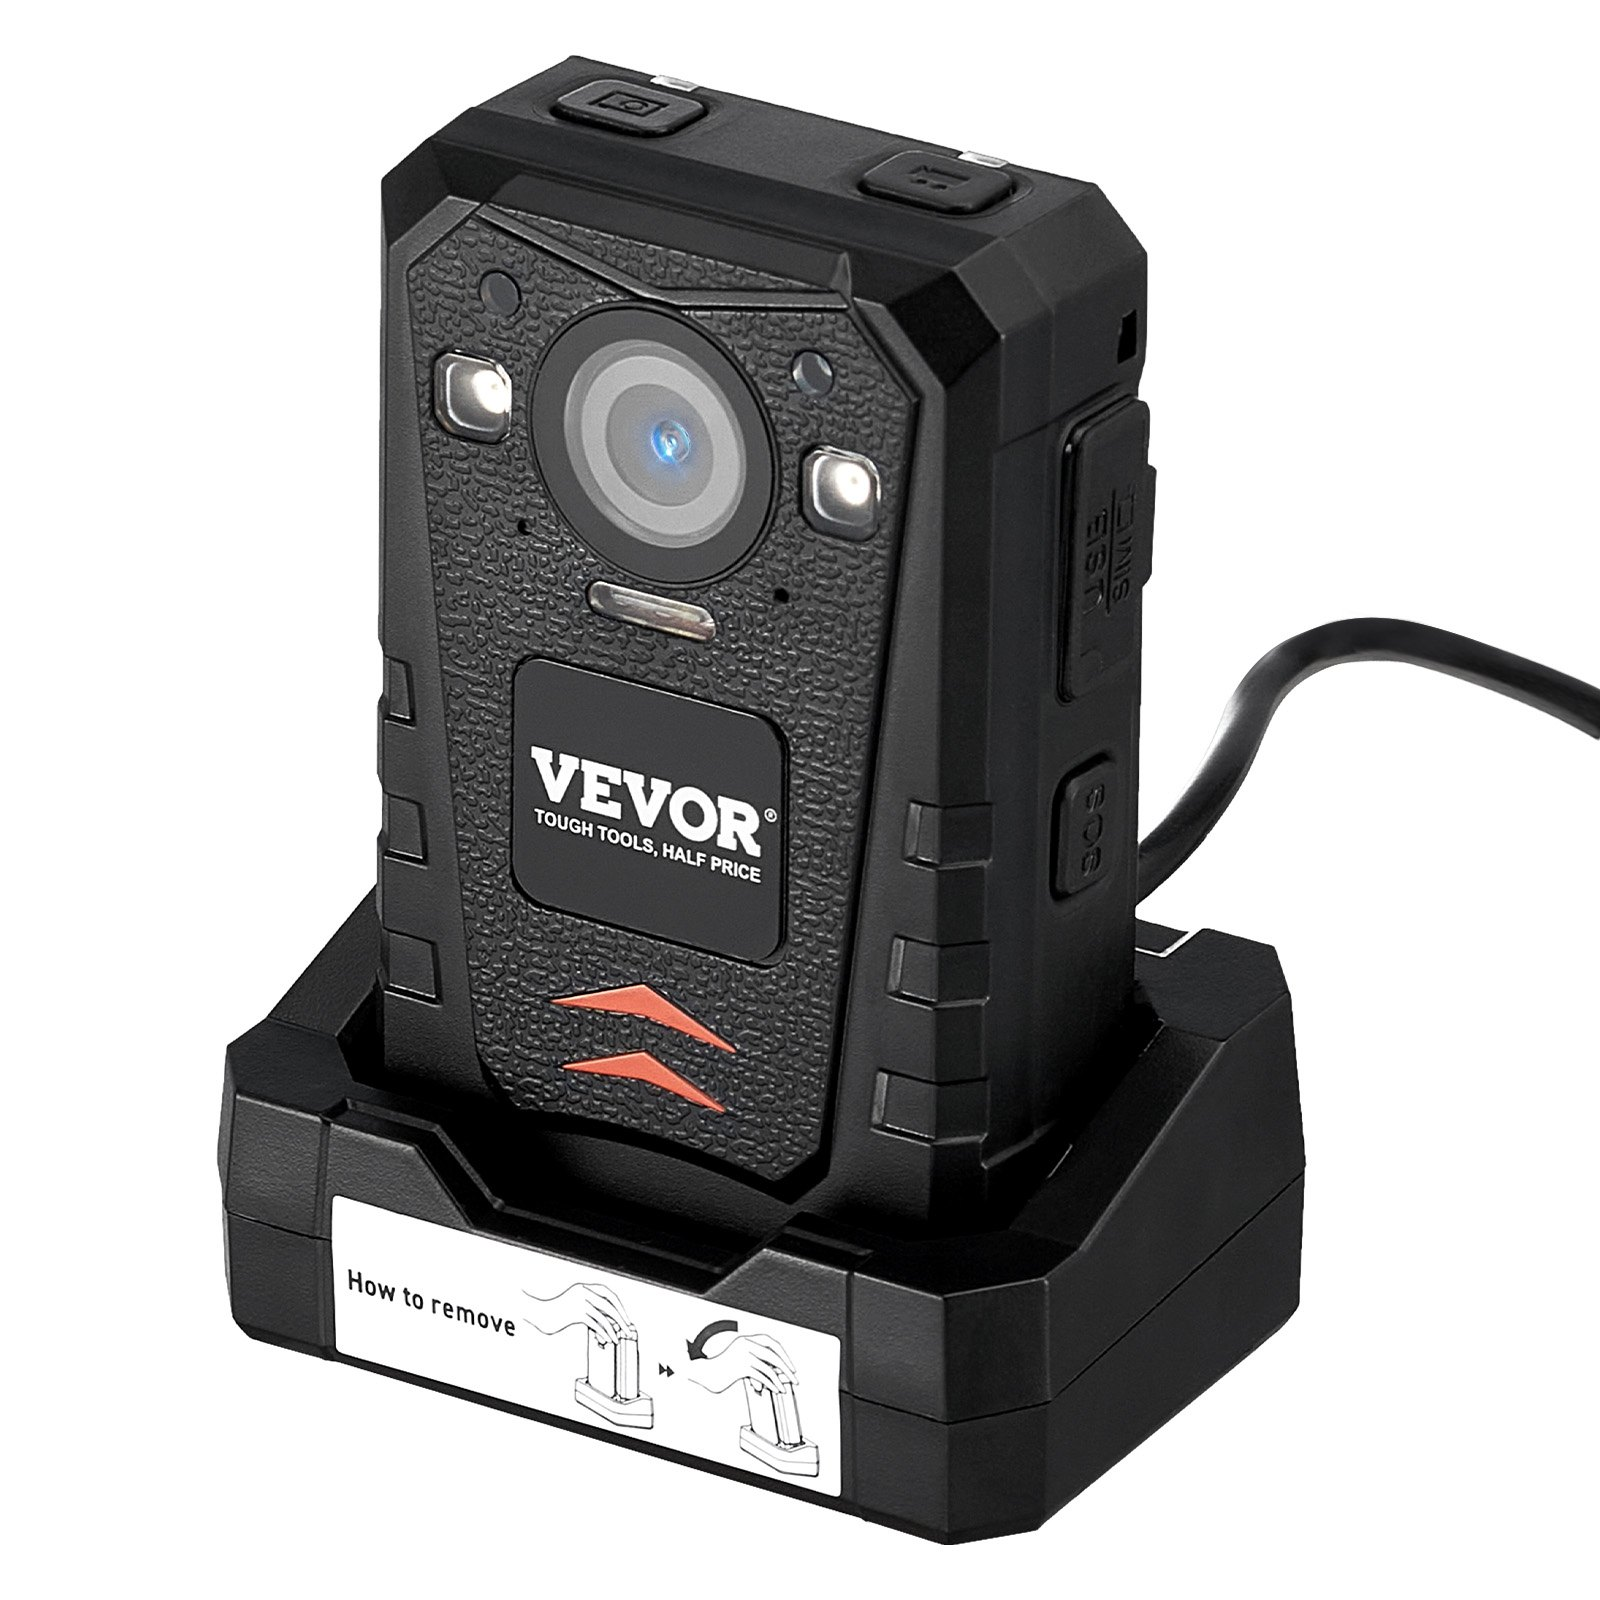 VEVOR 1440P HD Police Body Camera, 64GB Body Cam with Audio Video Recording Picture, Built-in 3500 mAh Battery, 2.0" LCD, Infrared Night Vision, Waterproof GPS Personal Body Cam for Law Enforcement, Goodies N Stuff